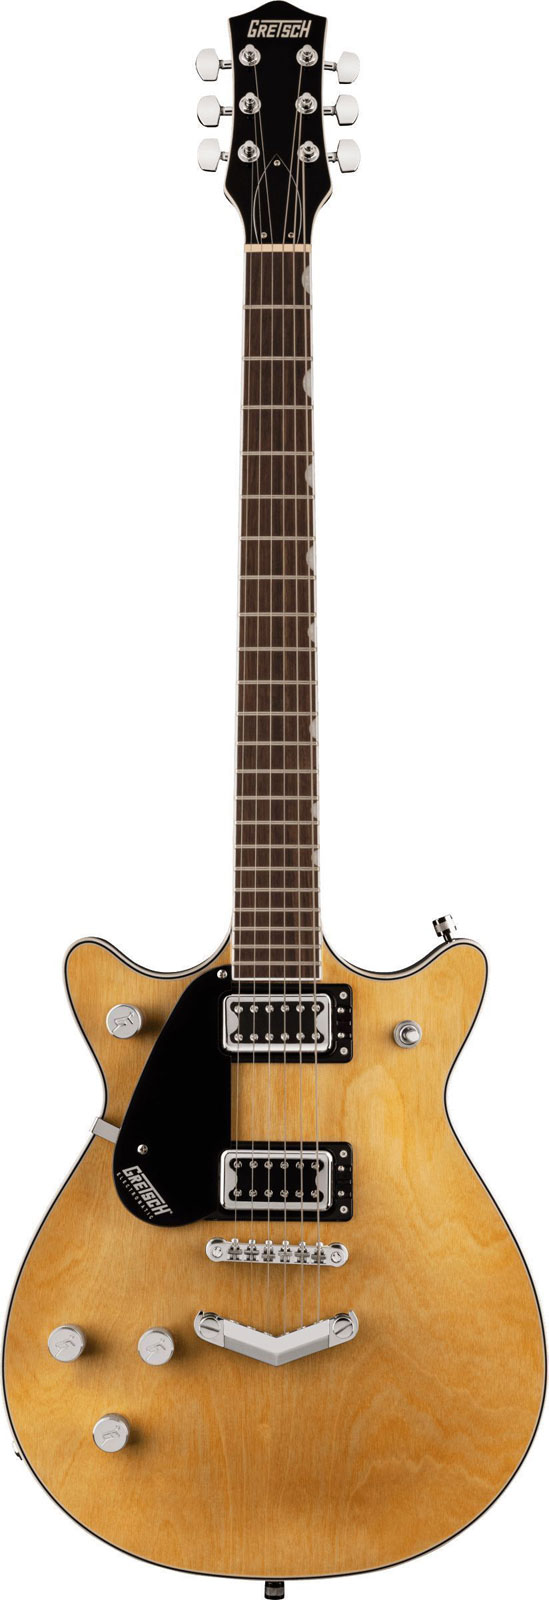 GRETSCH GUITARS G5222LH ELECTROMATIC DOUBLE JET BT WITH V-STOPTAIL,LH IL NATURAL